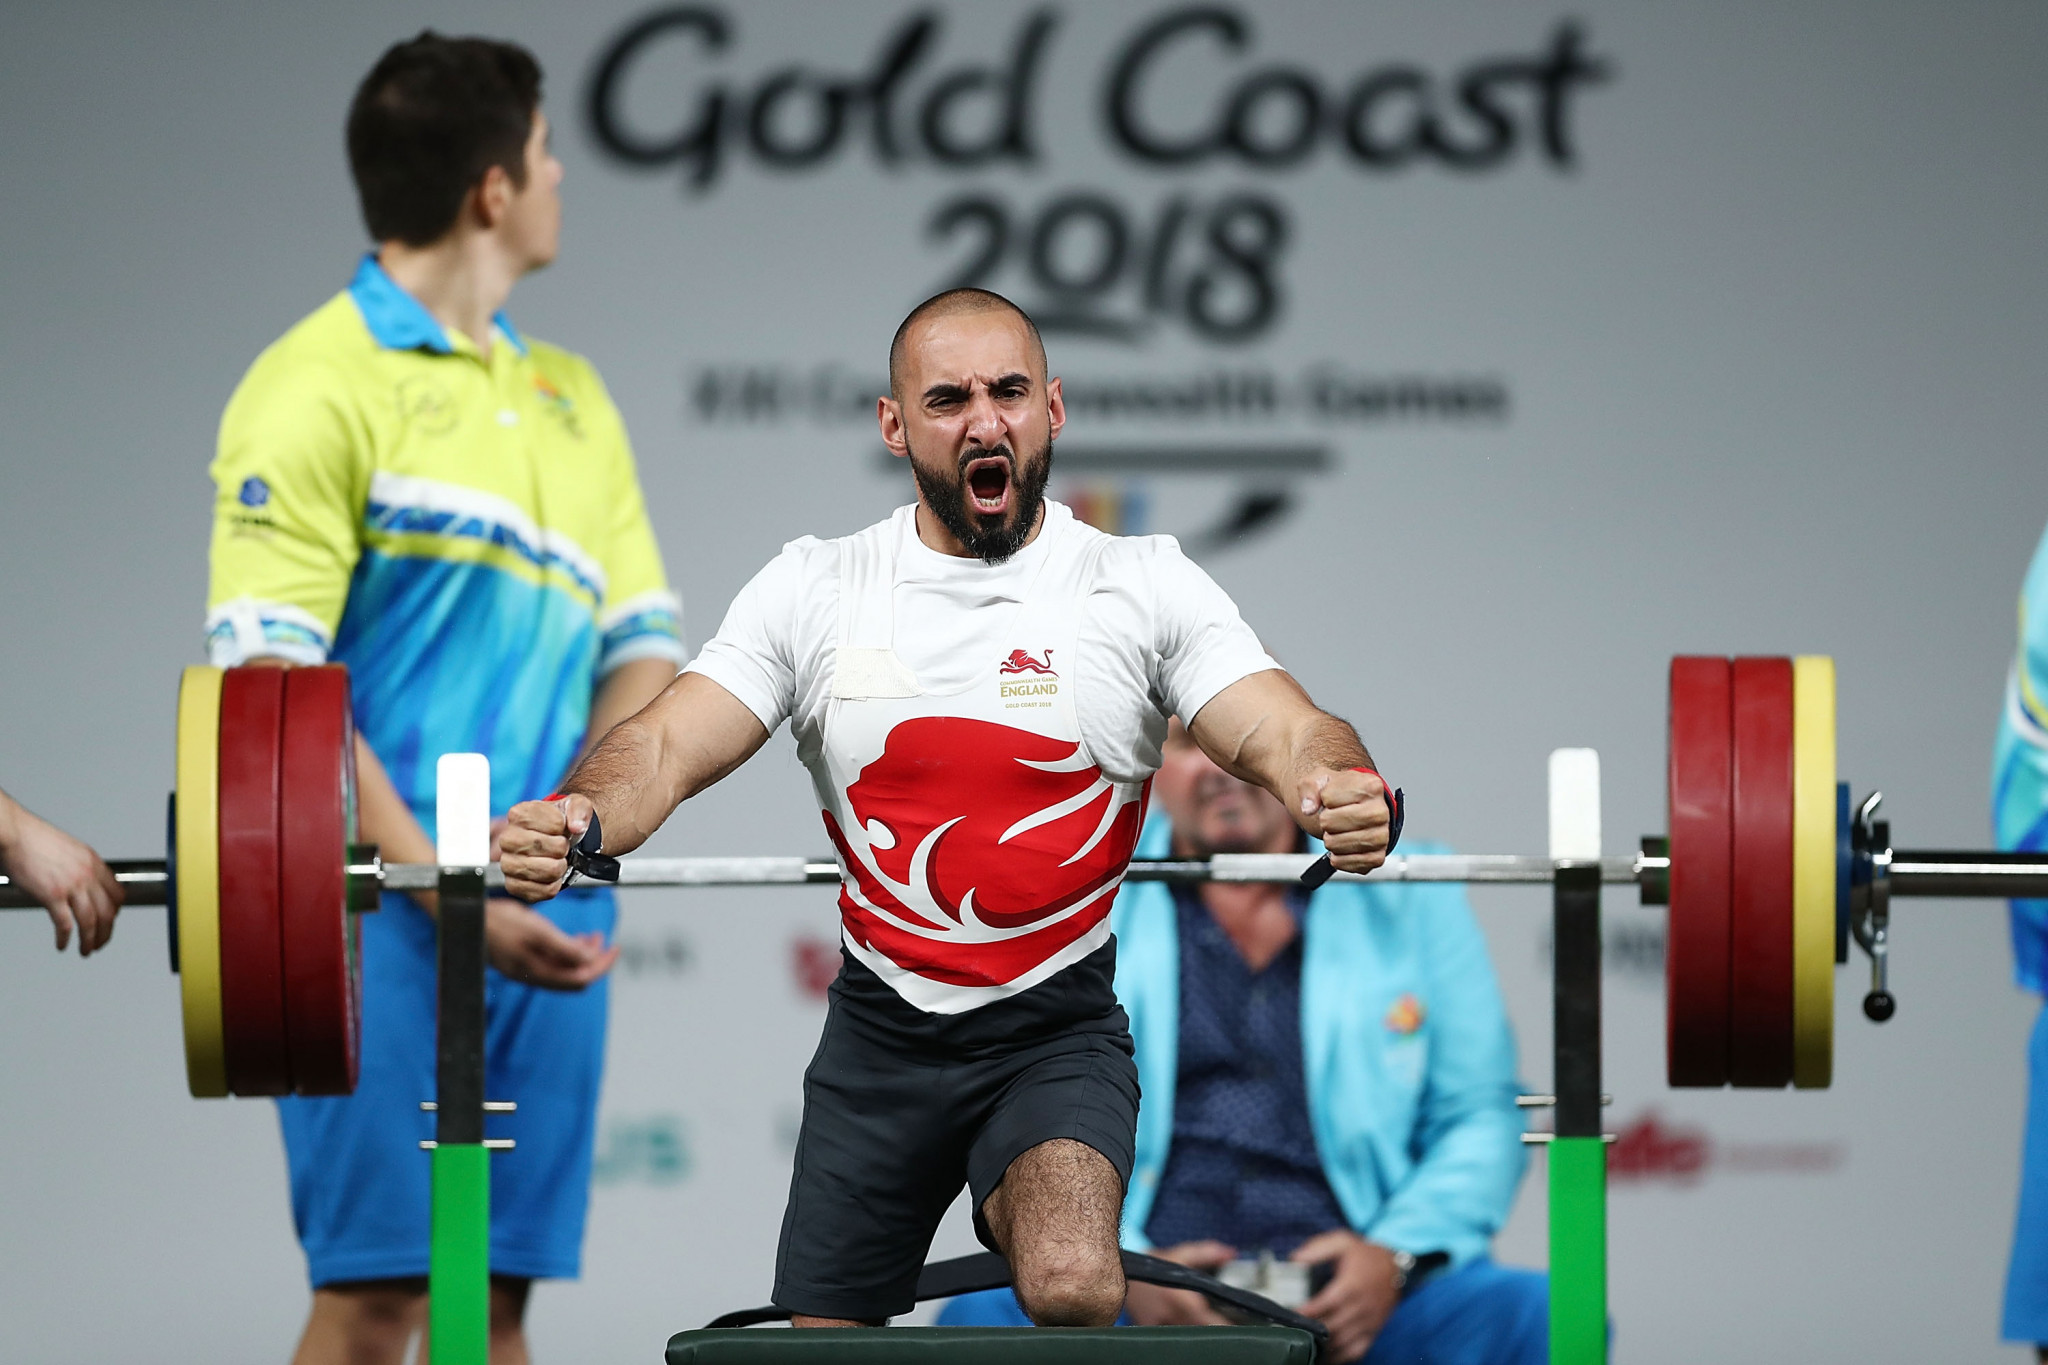 British Paralympic powerlifter Ali Jawad claimed WADA's credibility was in tatters ©Getty Images